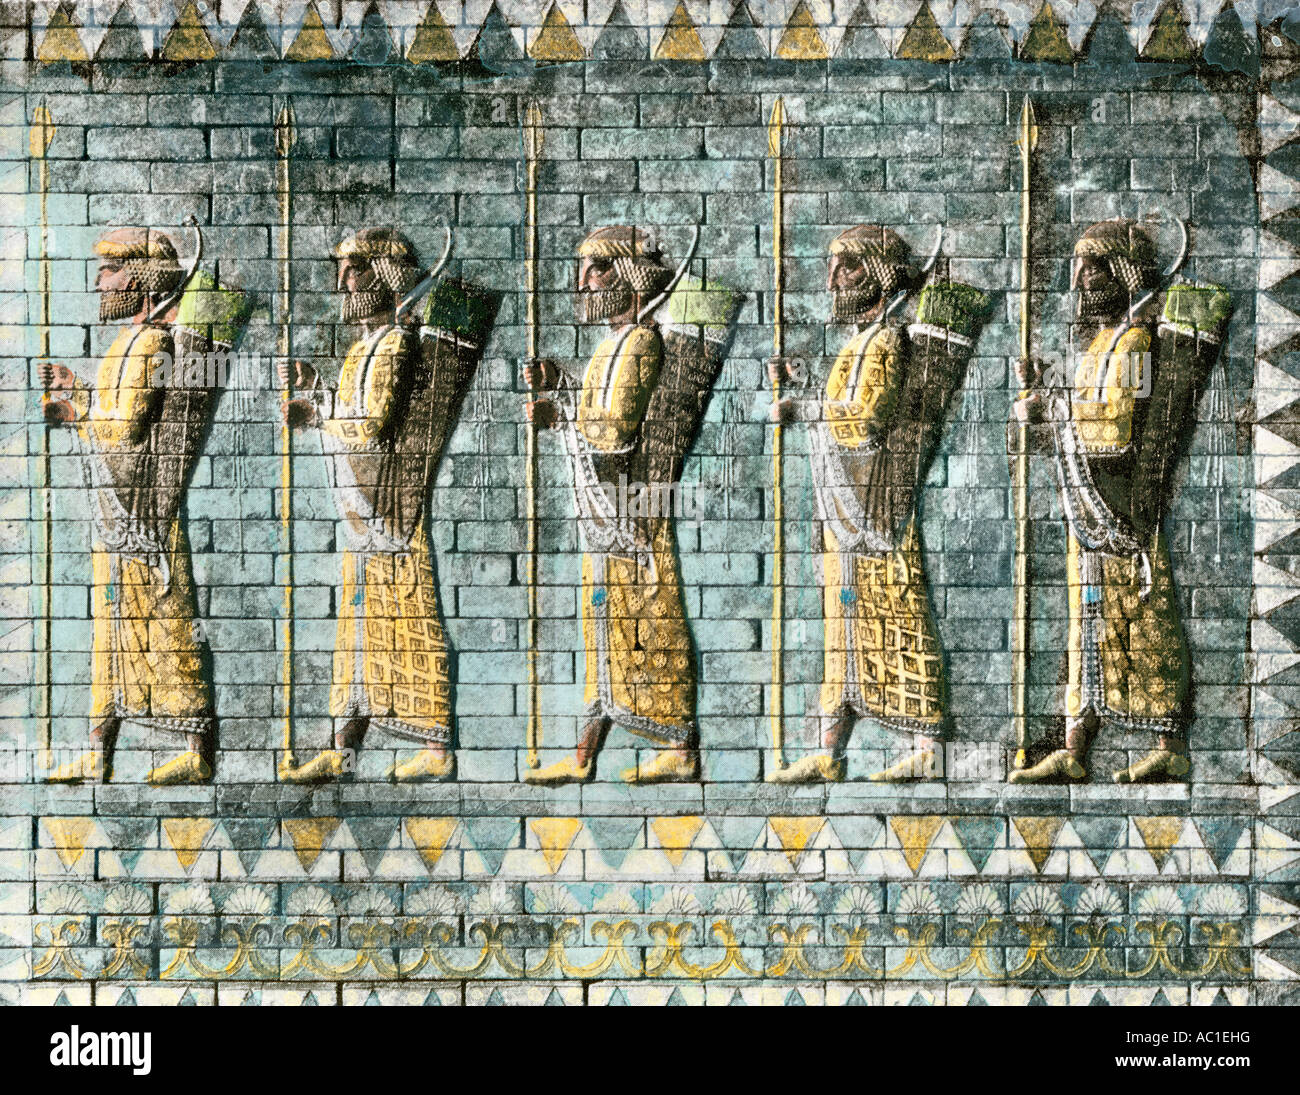 Archers of the Royal Persian Guard of Darius from the Hall of Artaxerxes II at Susa. Hand-colored halftone of an illustration Stock Photo